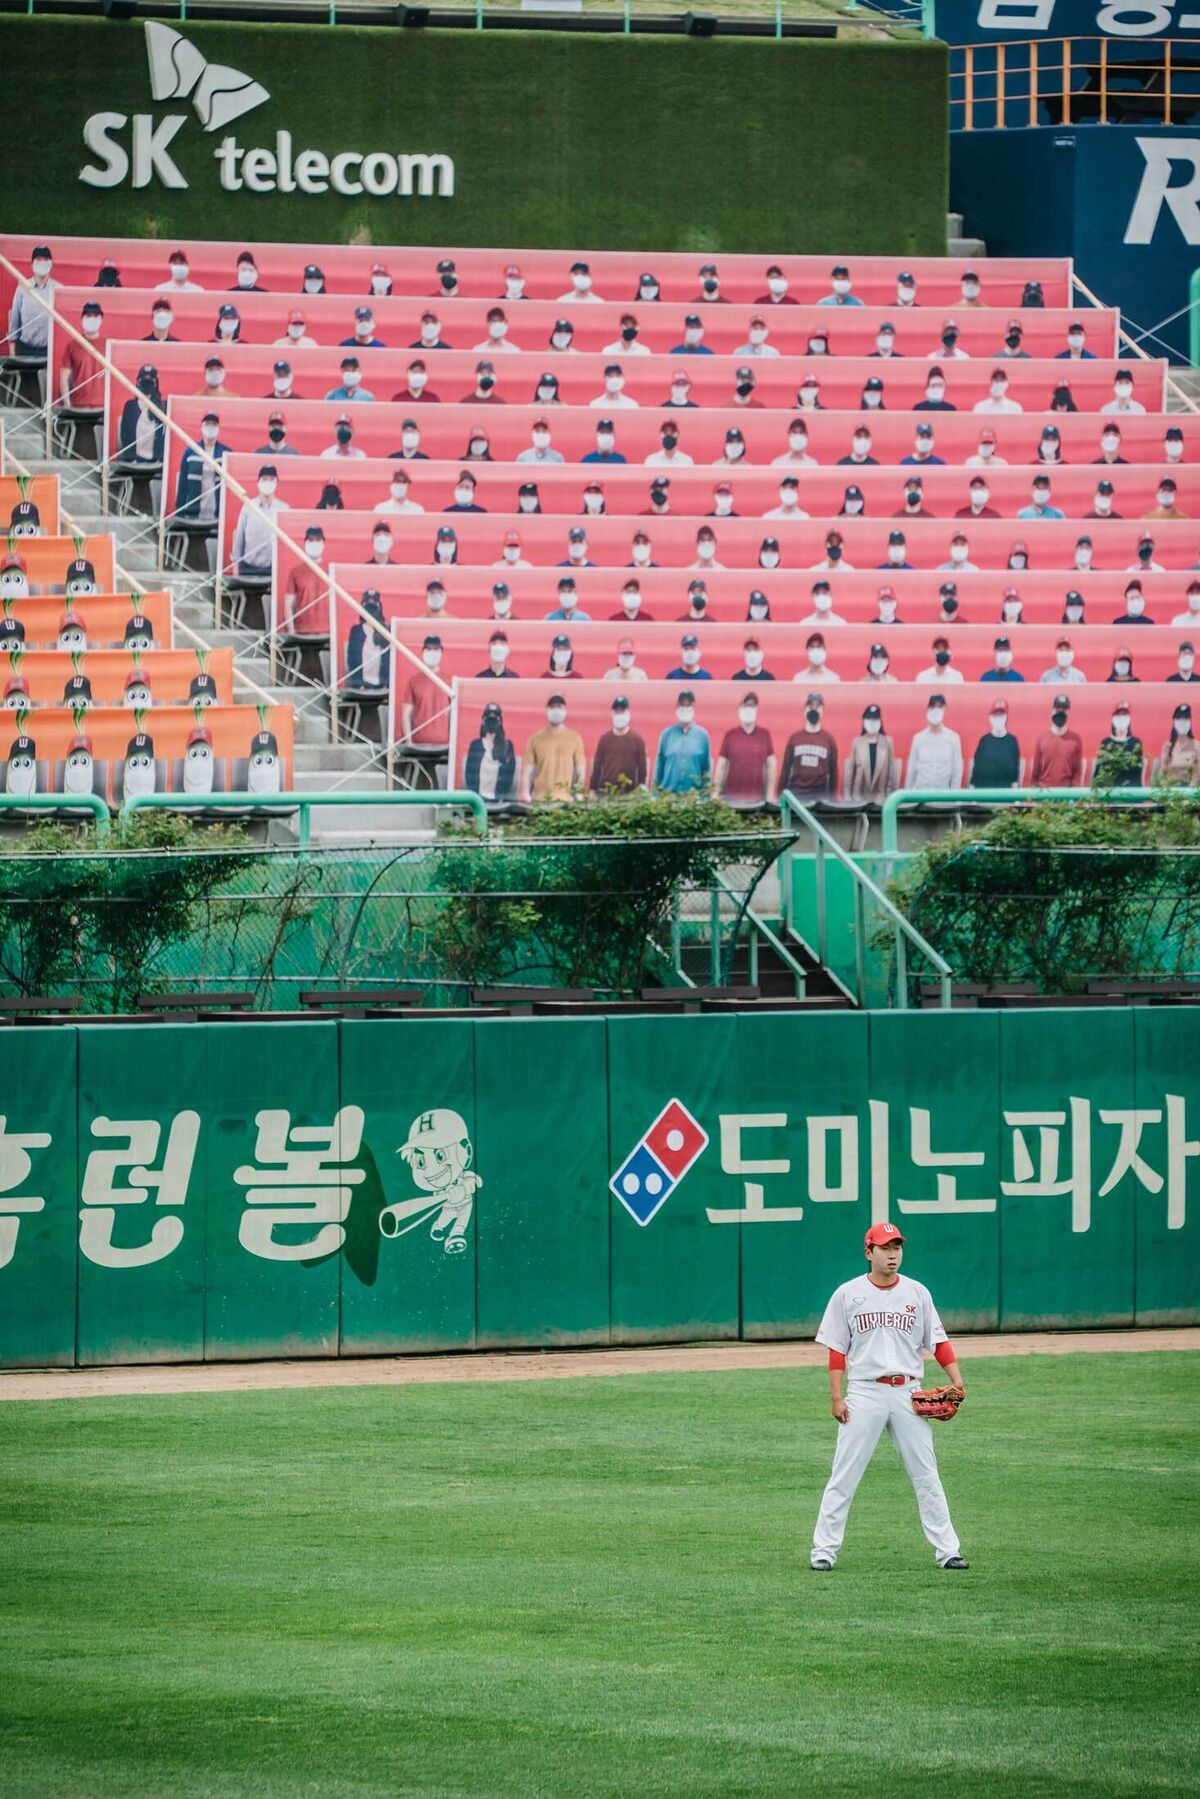 30 HQ Pictures South Korea Baseball Standings / South Korean Baseball Team Standing Outside Dugout Stock Photo Alamy